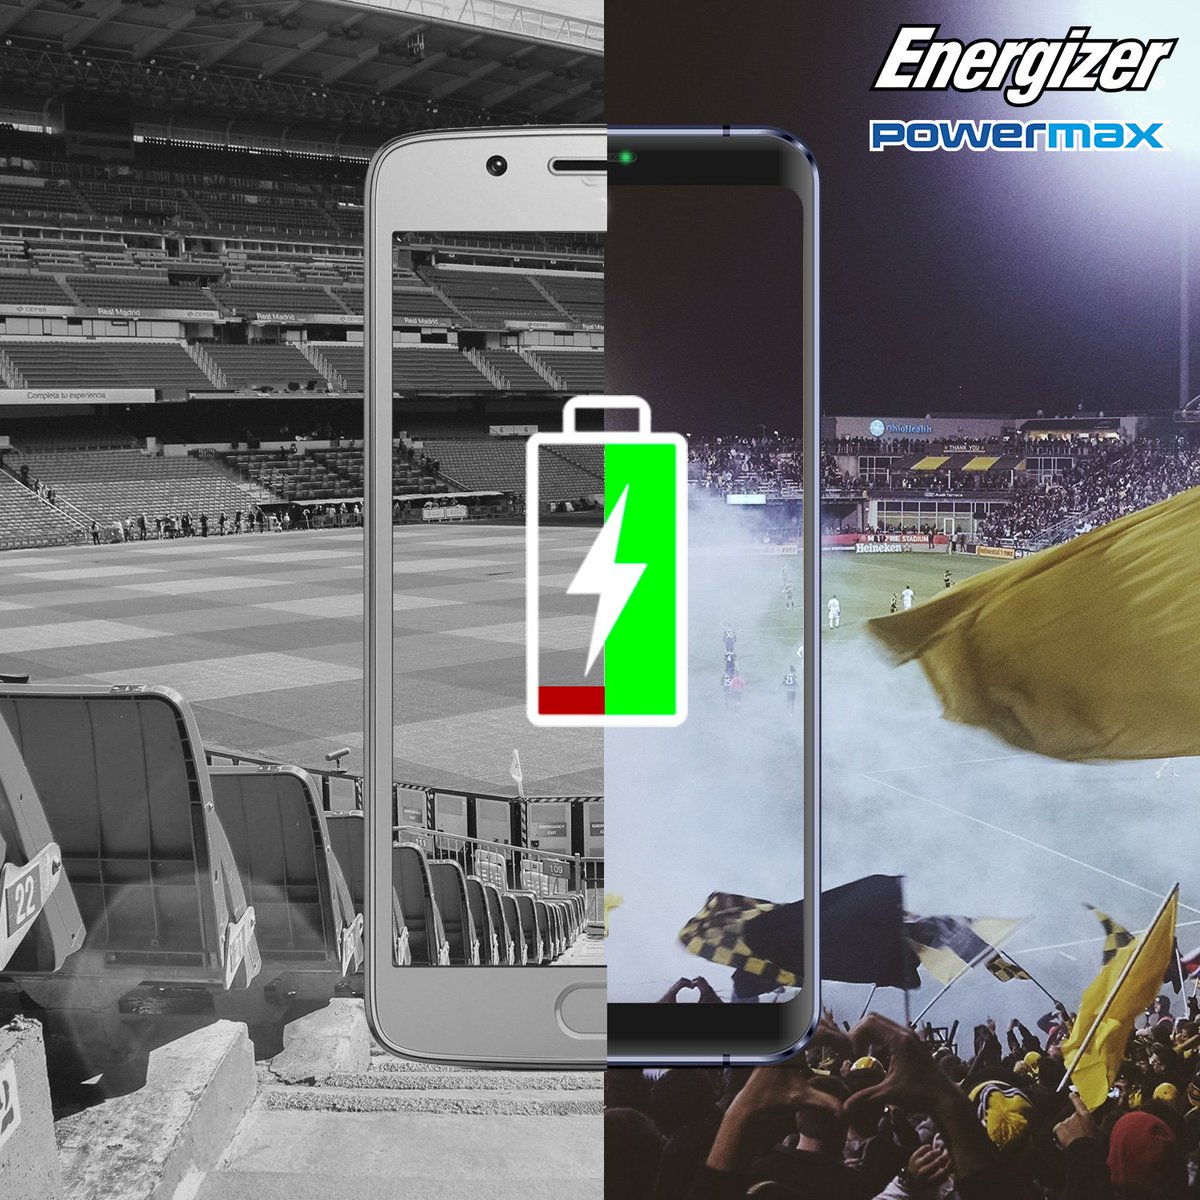 Make sure you are on the Powerful Side: #EnergizerPowerMax P600S powerful battery and edgeless screen are the true winning team #EnergizerMobile #WorldCup #soccer #WorldCup #BestBattery #BatteryLife #LongLastingQuality #LongLastingBattery #Smartphone #Android #Tech #Innovation